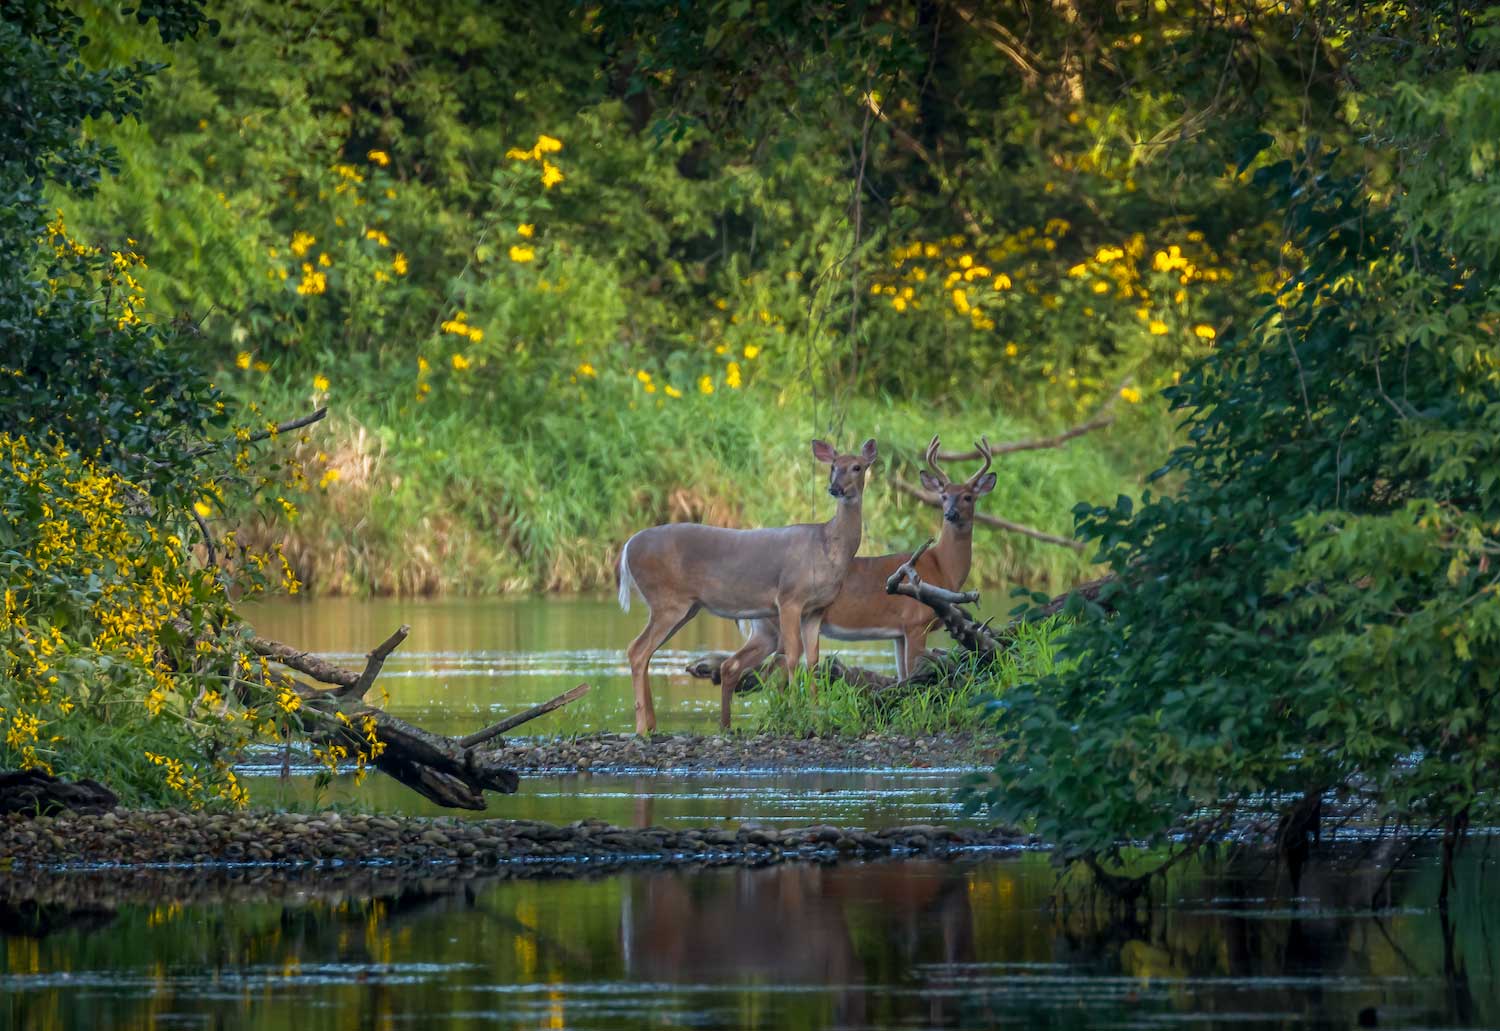 Two deer standing in a shallow stream.